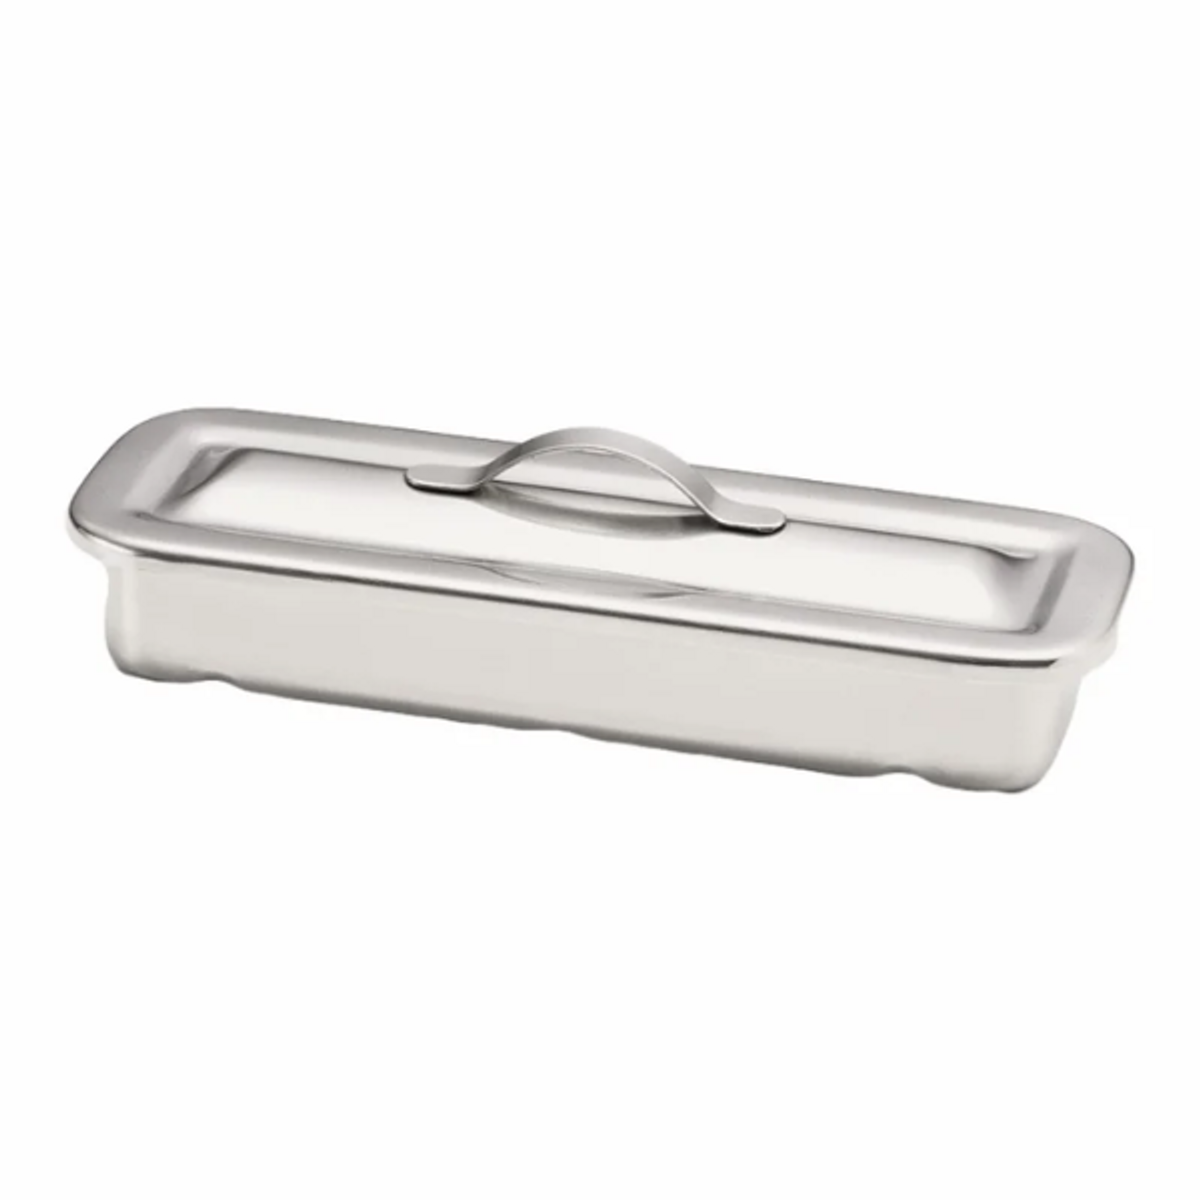 Dukal Tech-Med Stainless Steel Instrument Trays